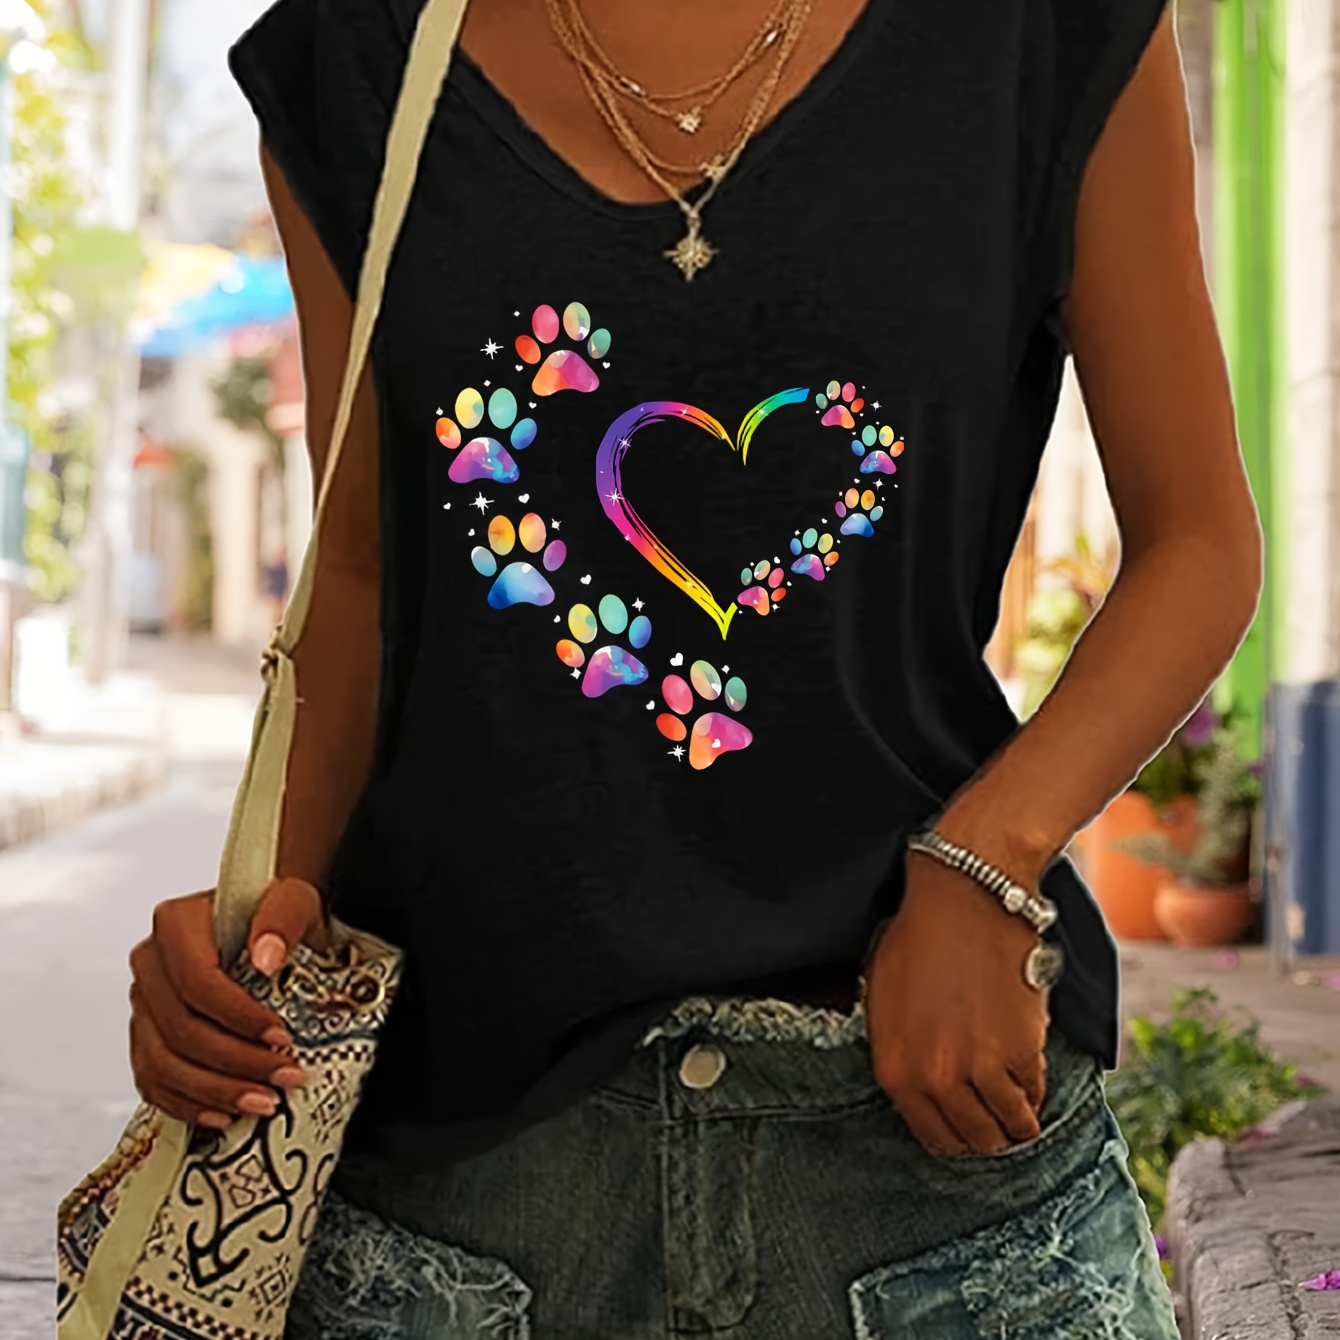 

Heart Print V Neck Tank Top, Casual Sleeveless Tank Top For Spring & Summer, Women's Clothing